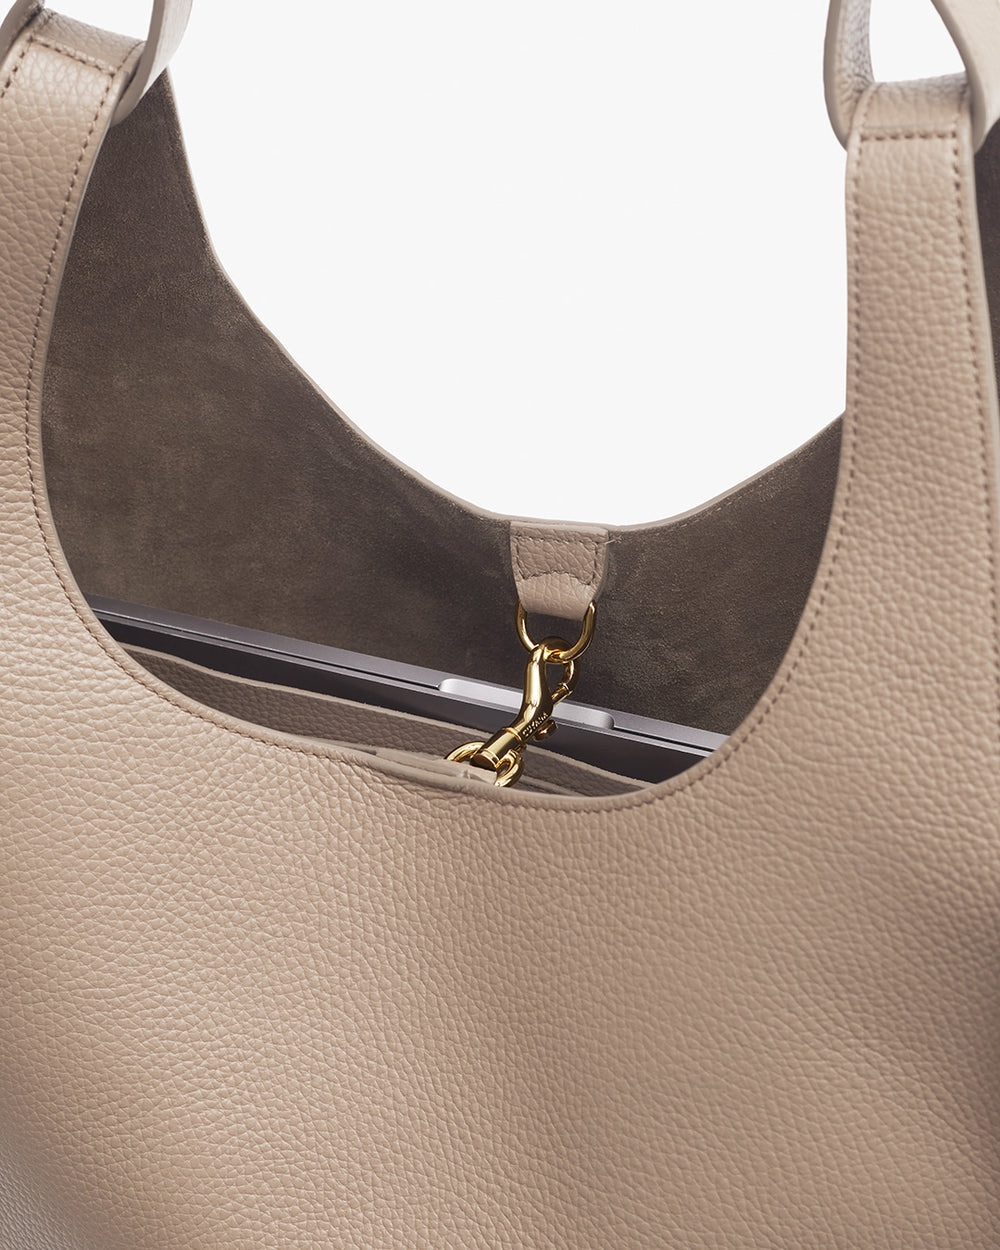 Close-up view of an open handbag with visible interior and clasp detail.